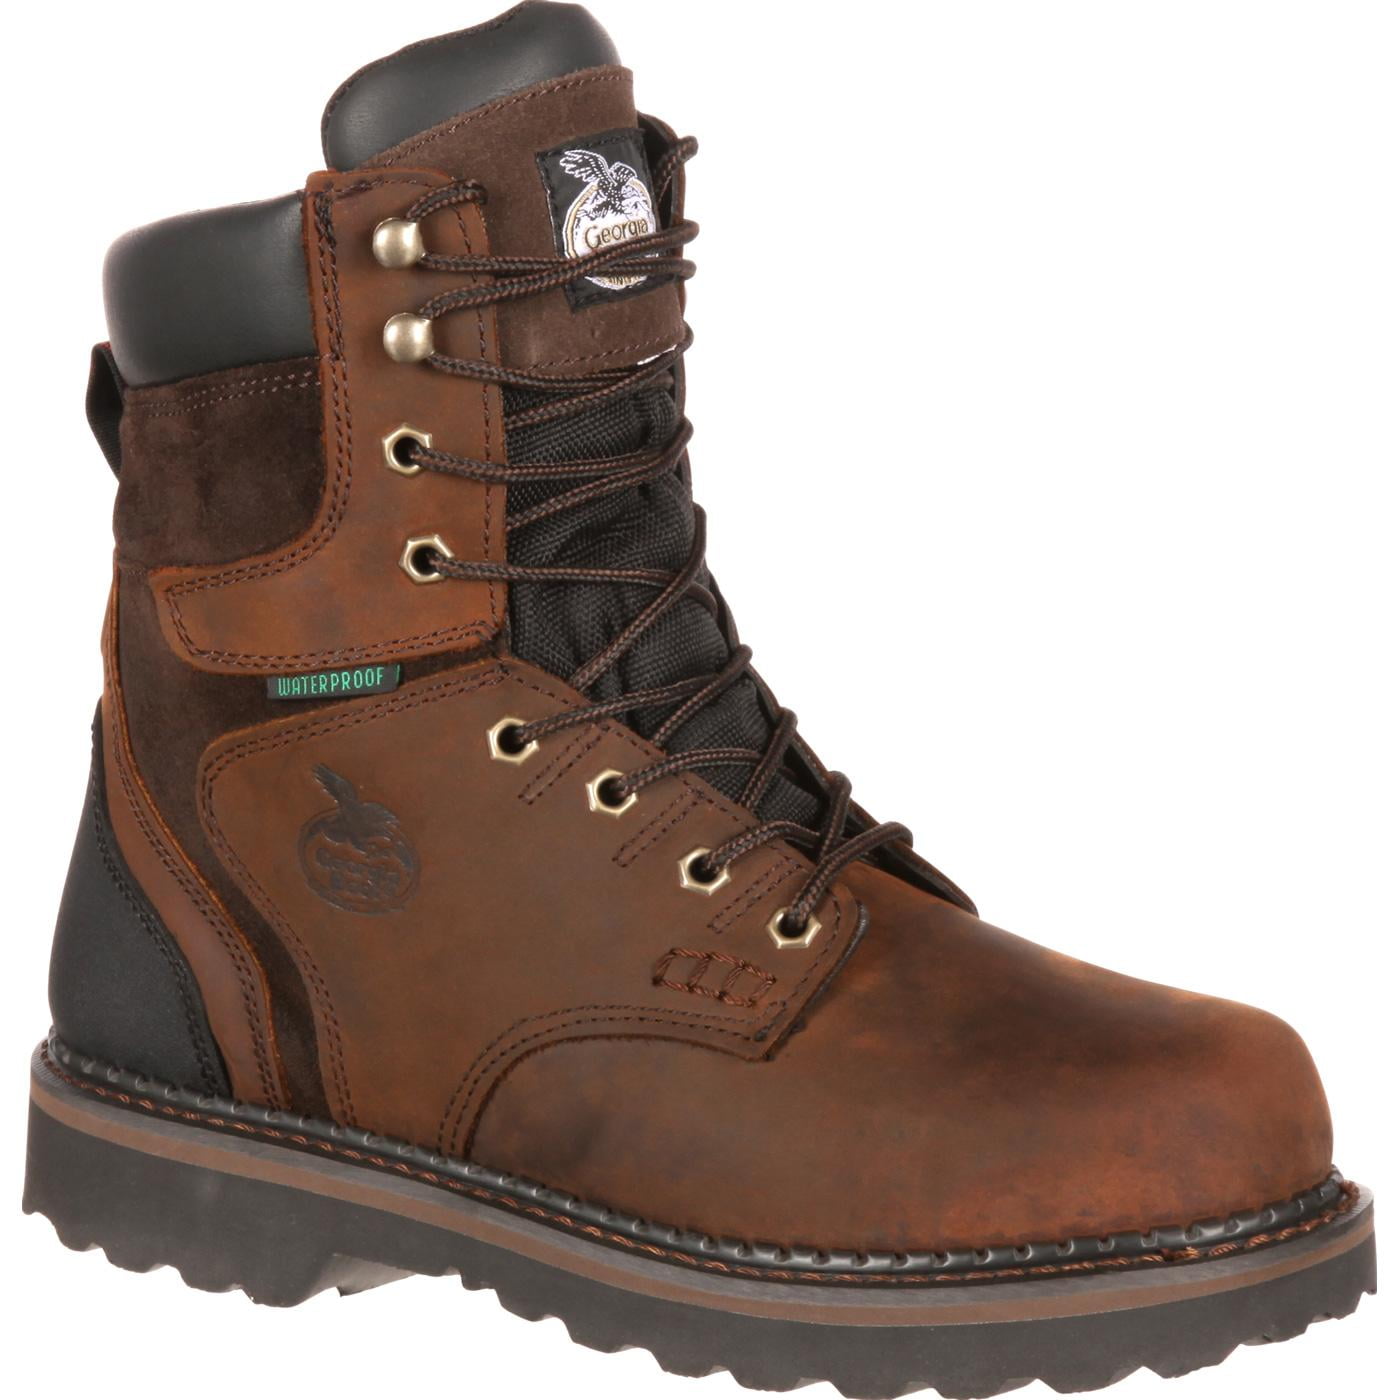 rocky s2v composite toe waterproof 200g insulated work boot